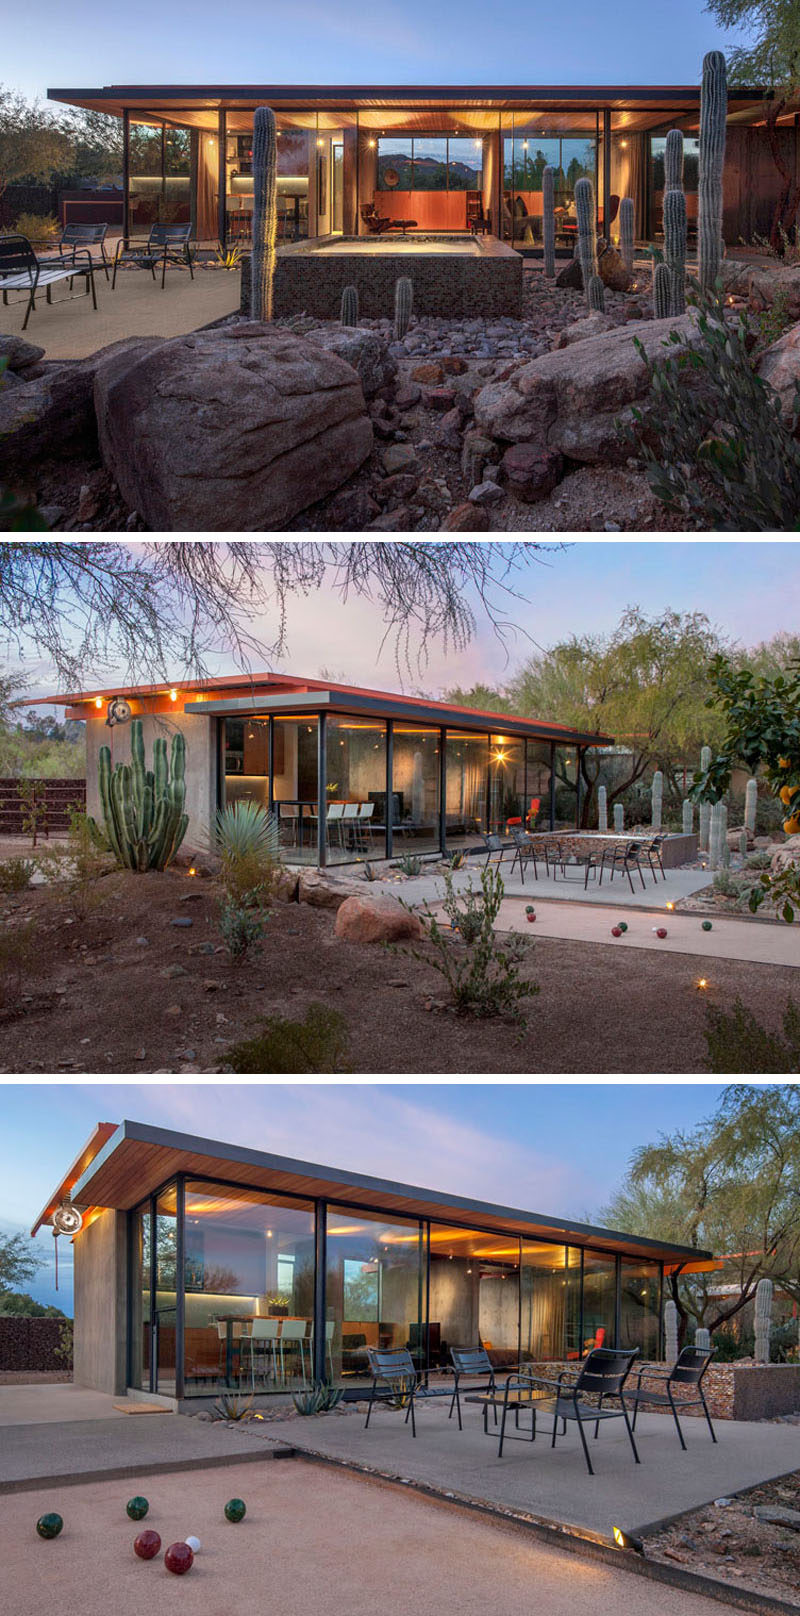 The Construction Zone have taken what was once a horse barn in Phoenix, Arizona, and transformed it into a modern guest house with plenty of glass. #ModernGuestHouse #GuestHouse #Architecture #OutdoorSpace #BocceCourt